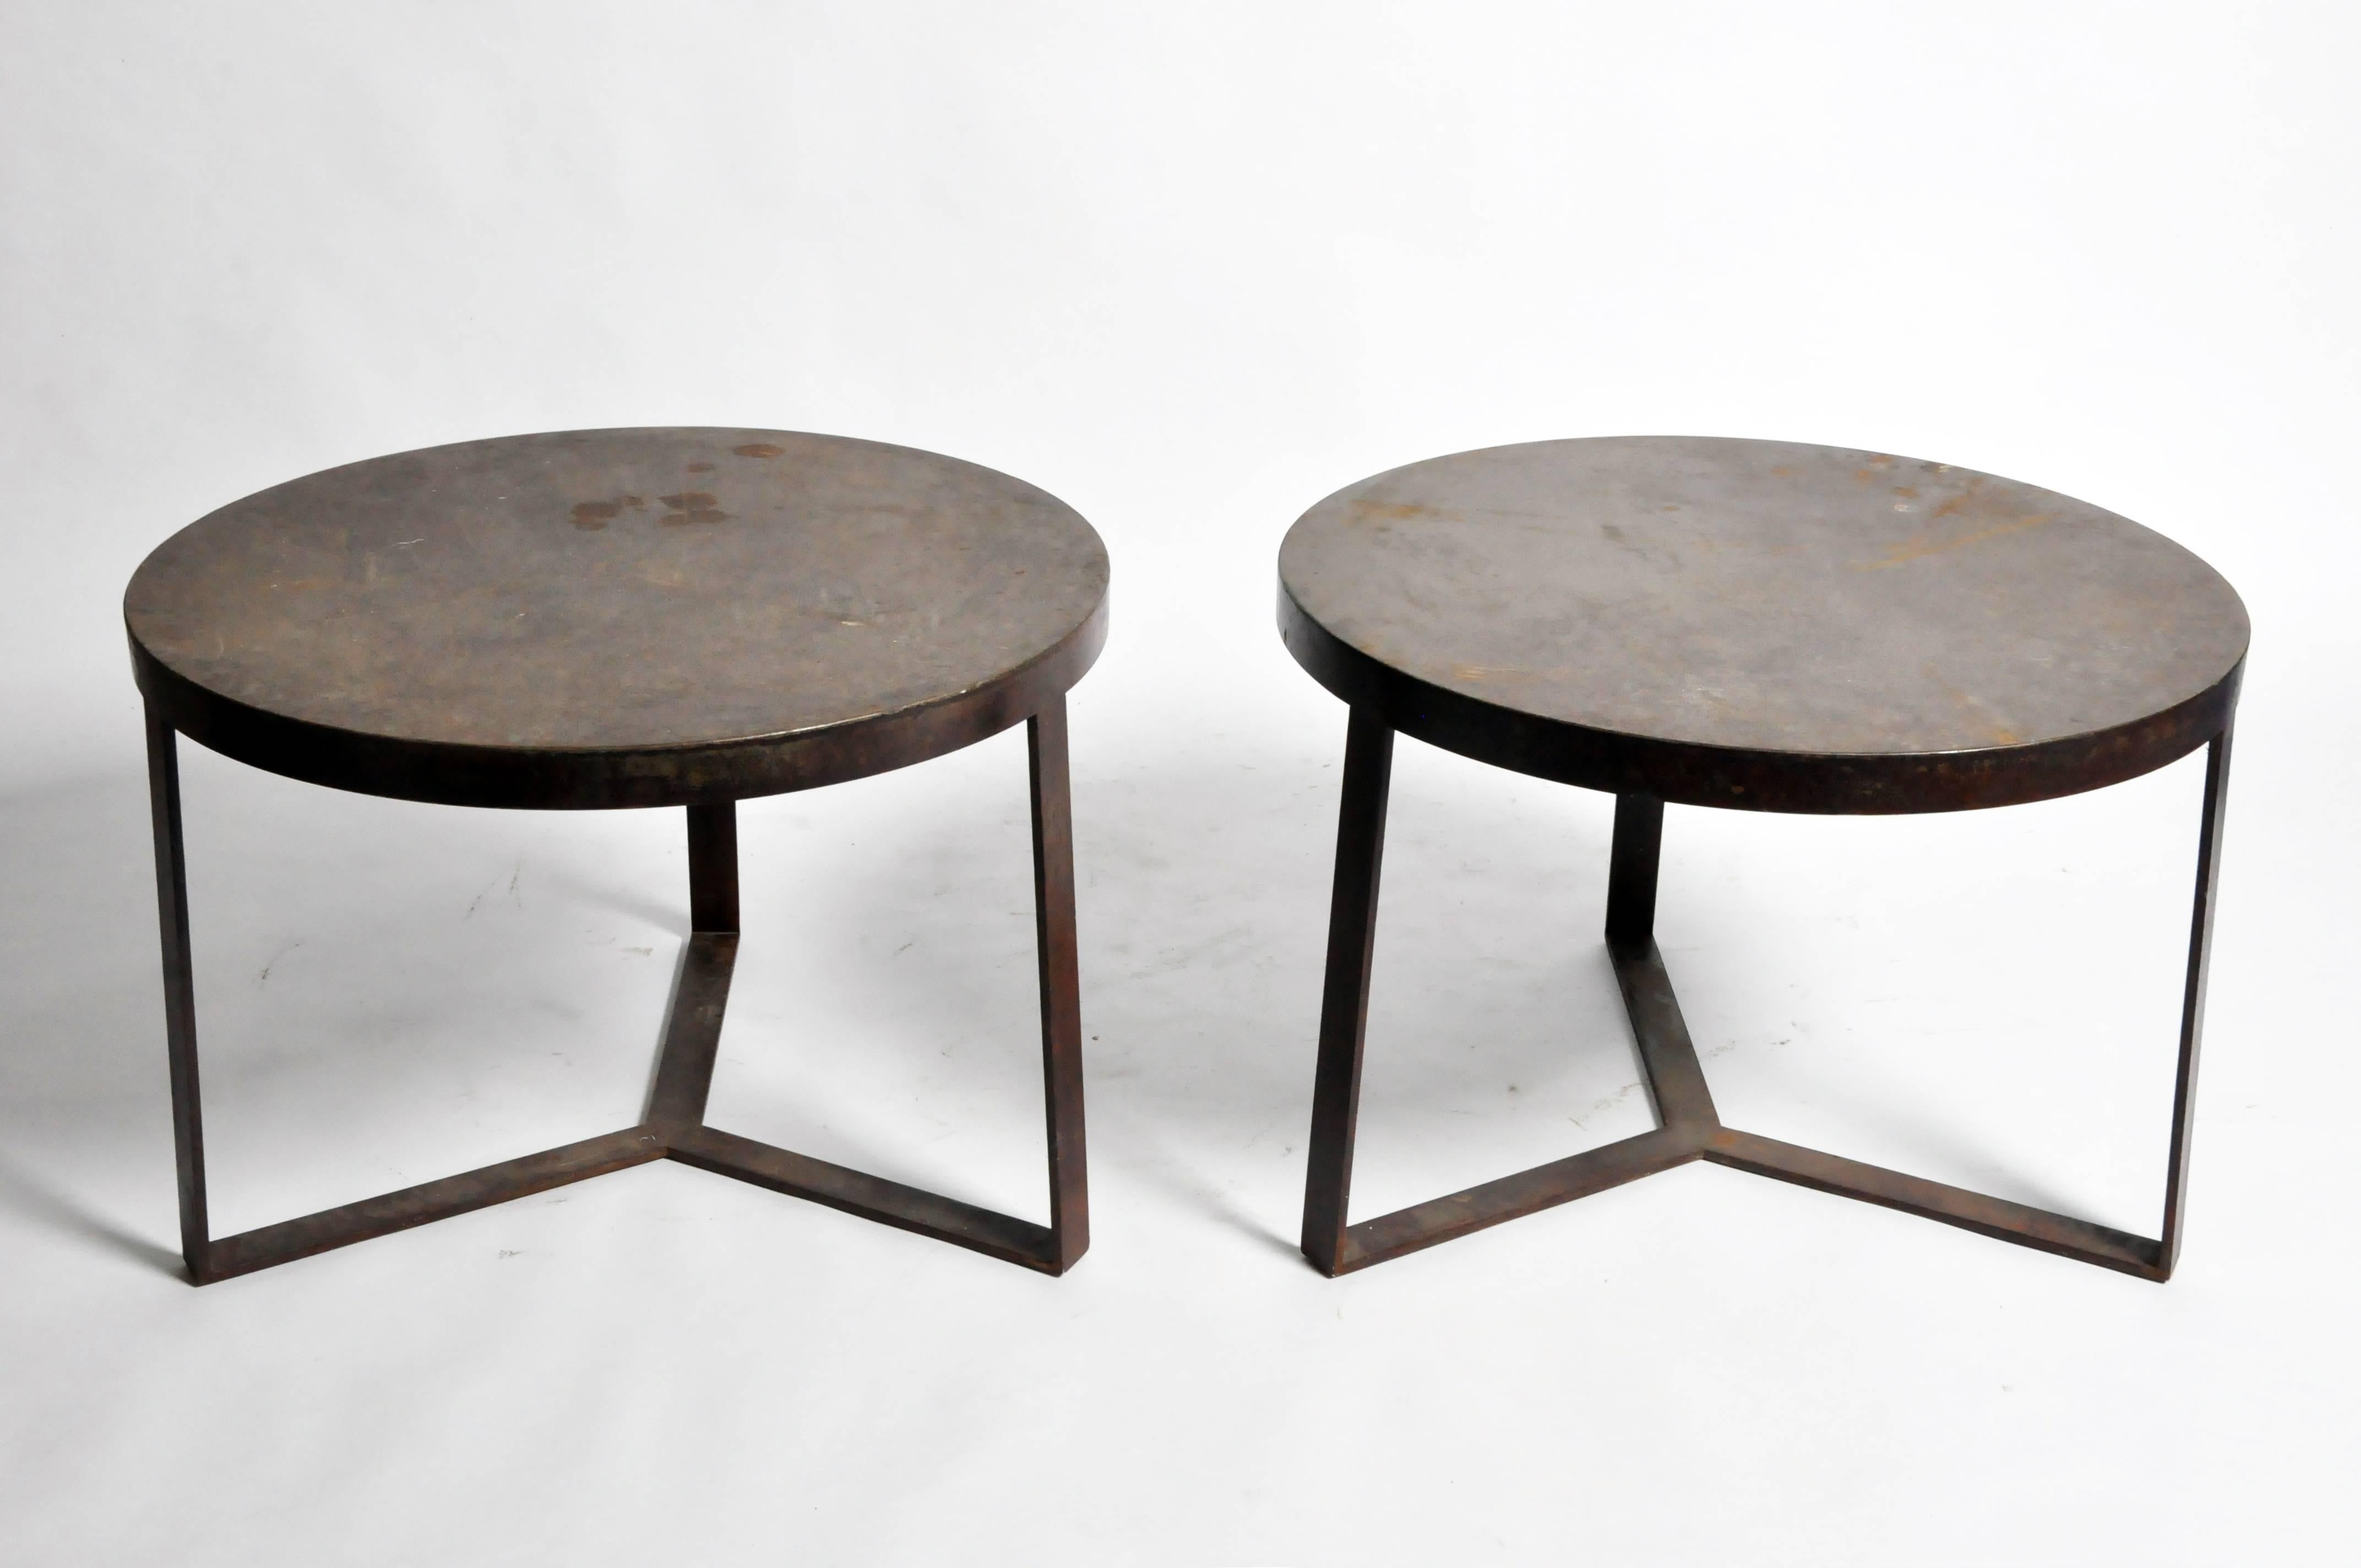 These round side tables are from Italy and was made from iron, c. 1940. They are ideal to add a industrial flare to any space in your home. 